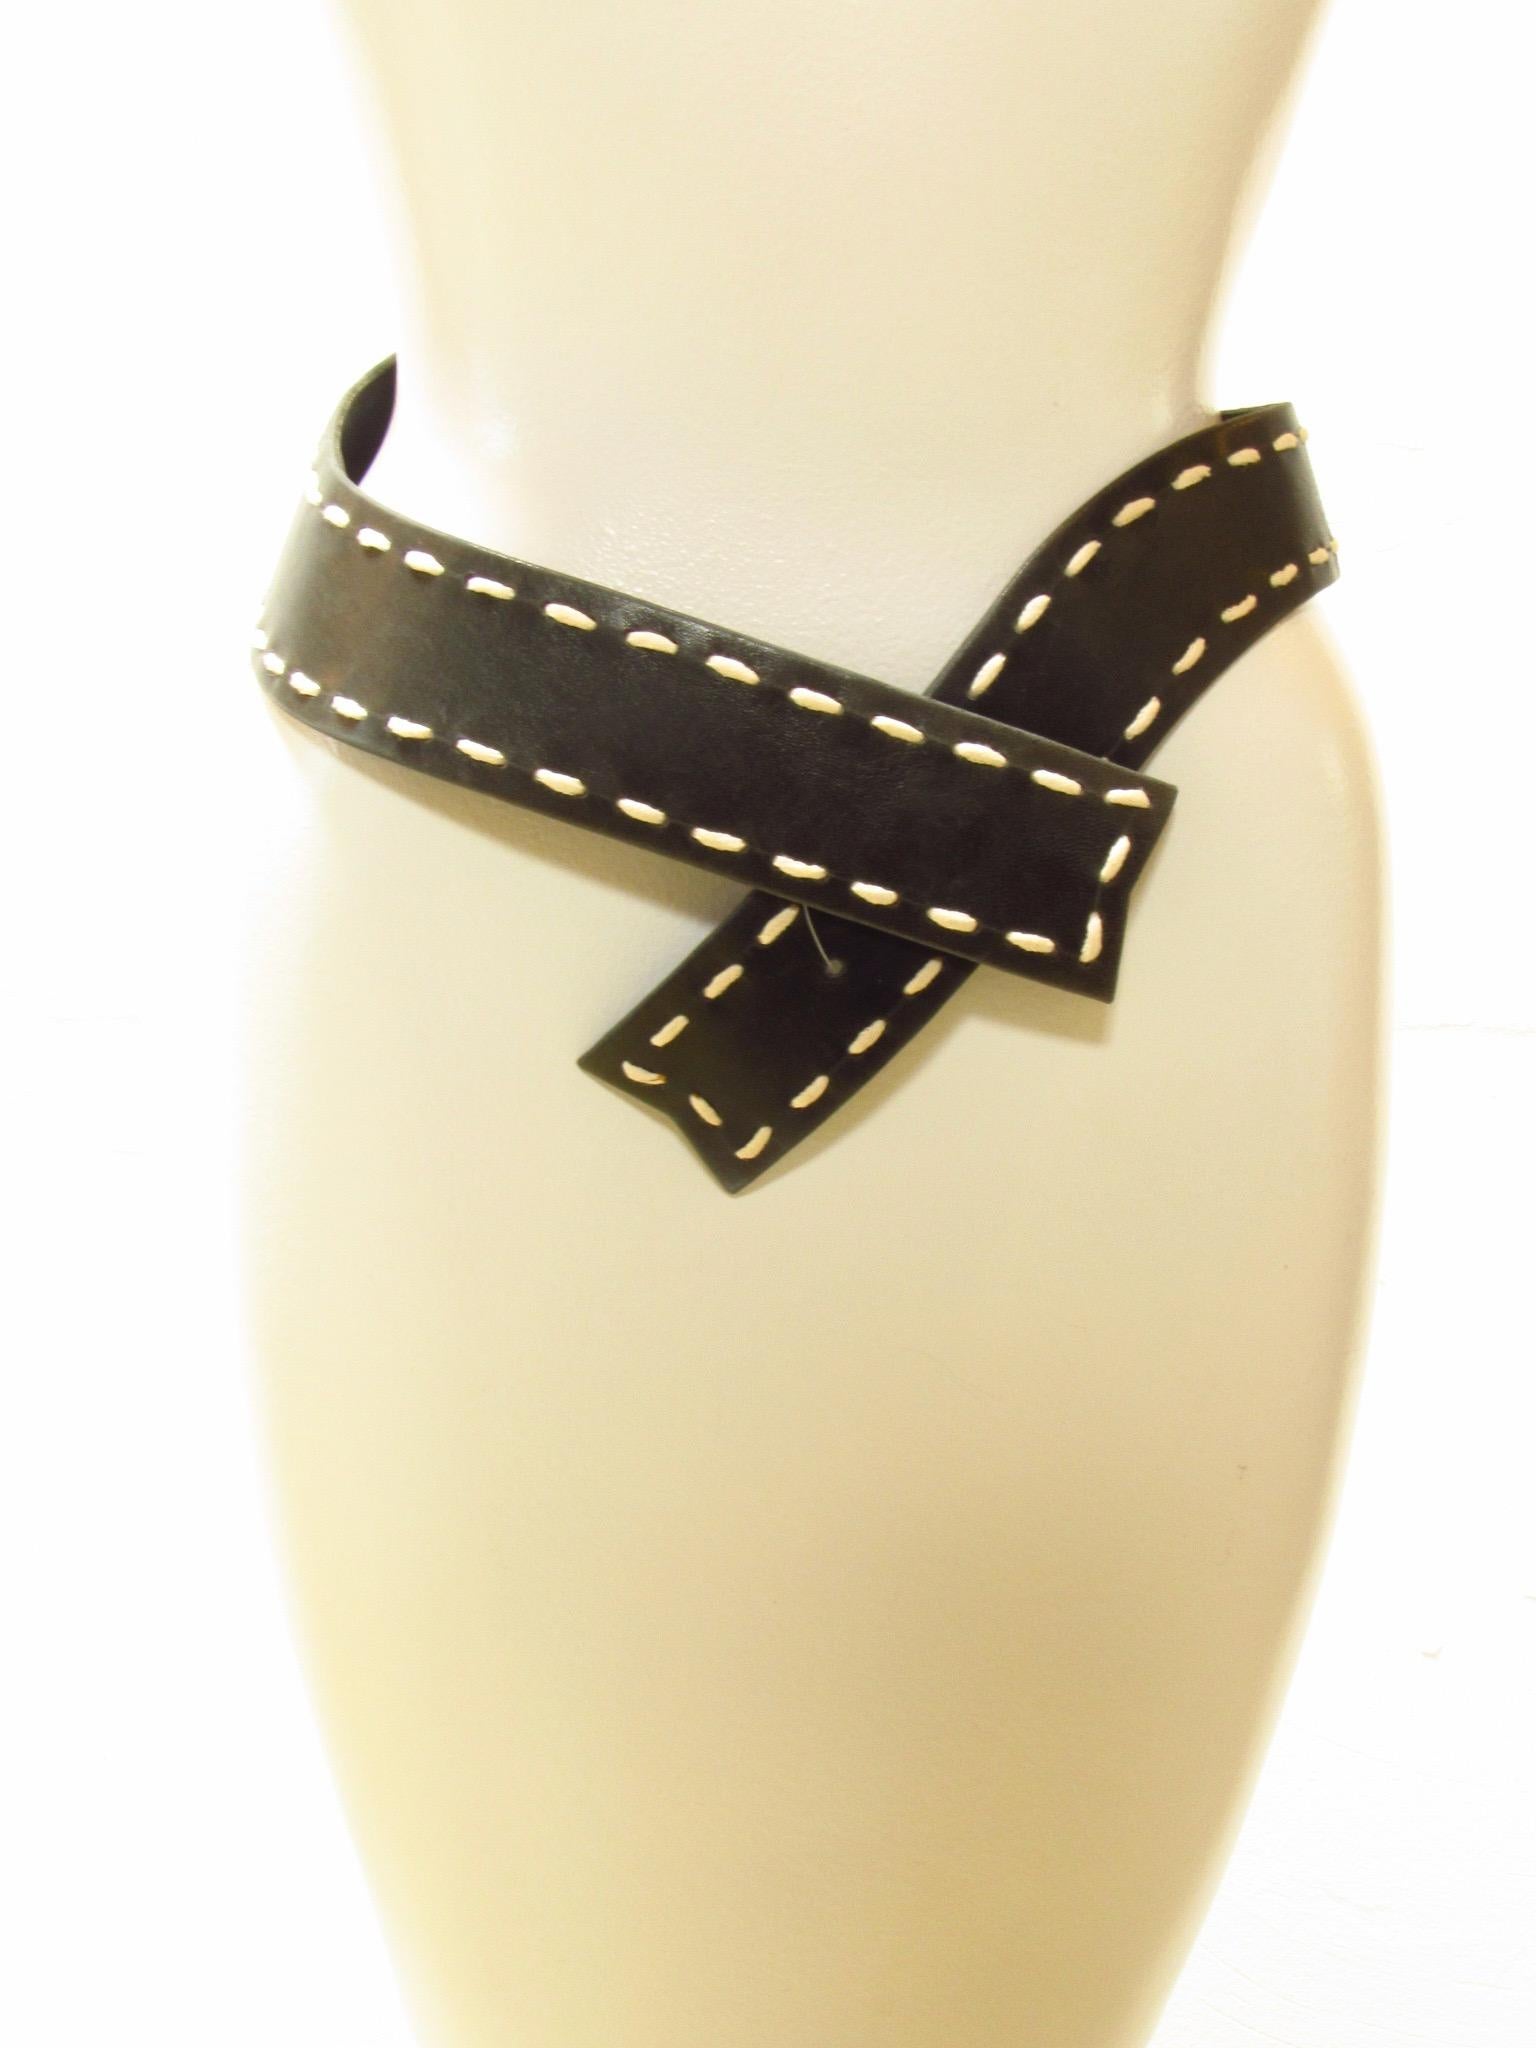 Curvaceous black belt from Chantal Thomass has striking white stitching around the edges. Secures with an inner hook.